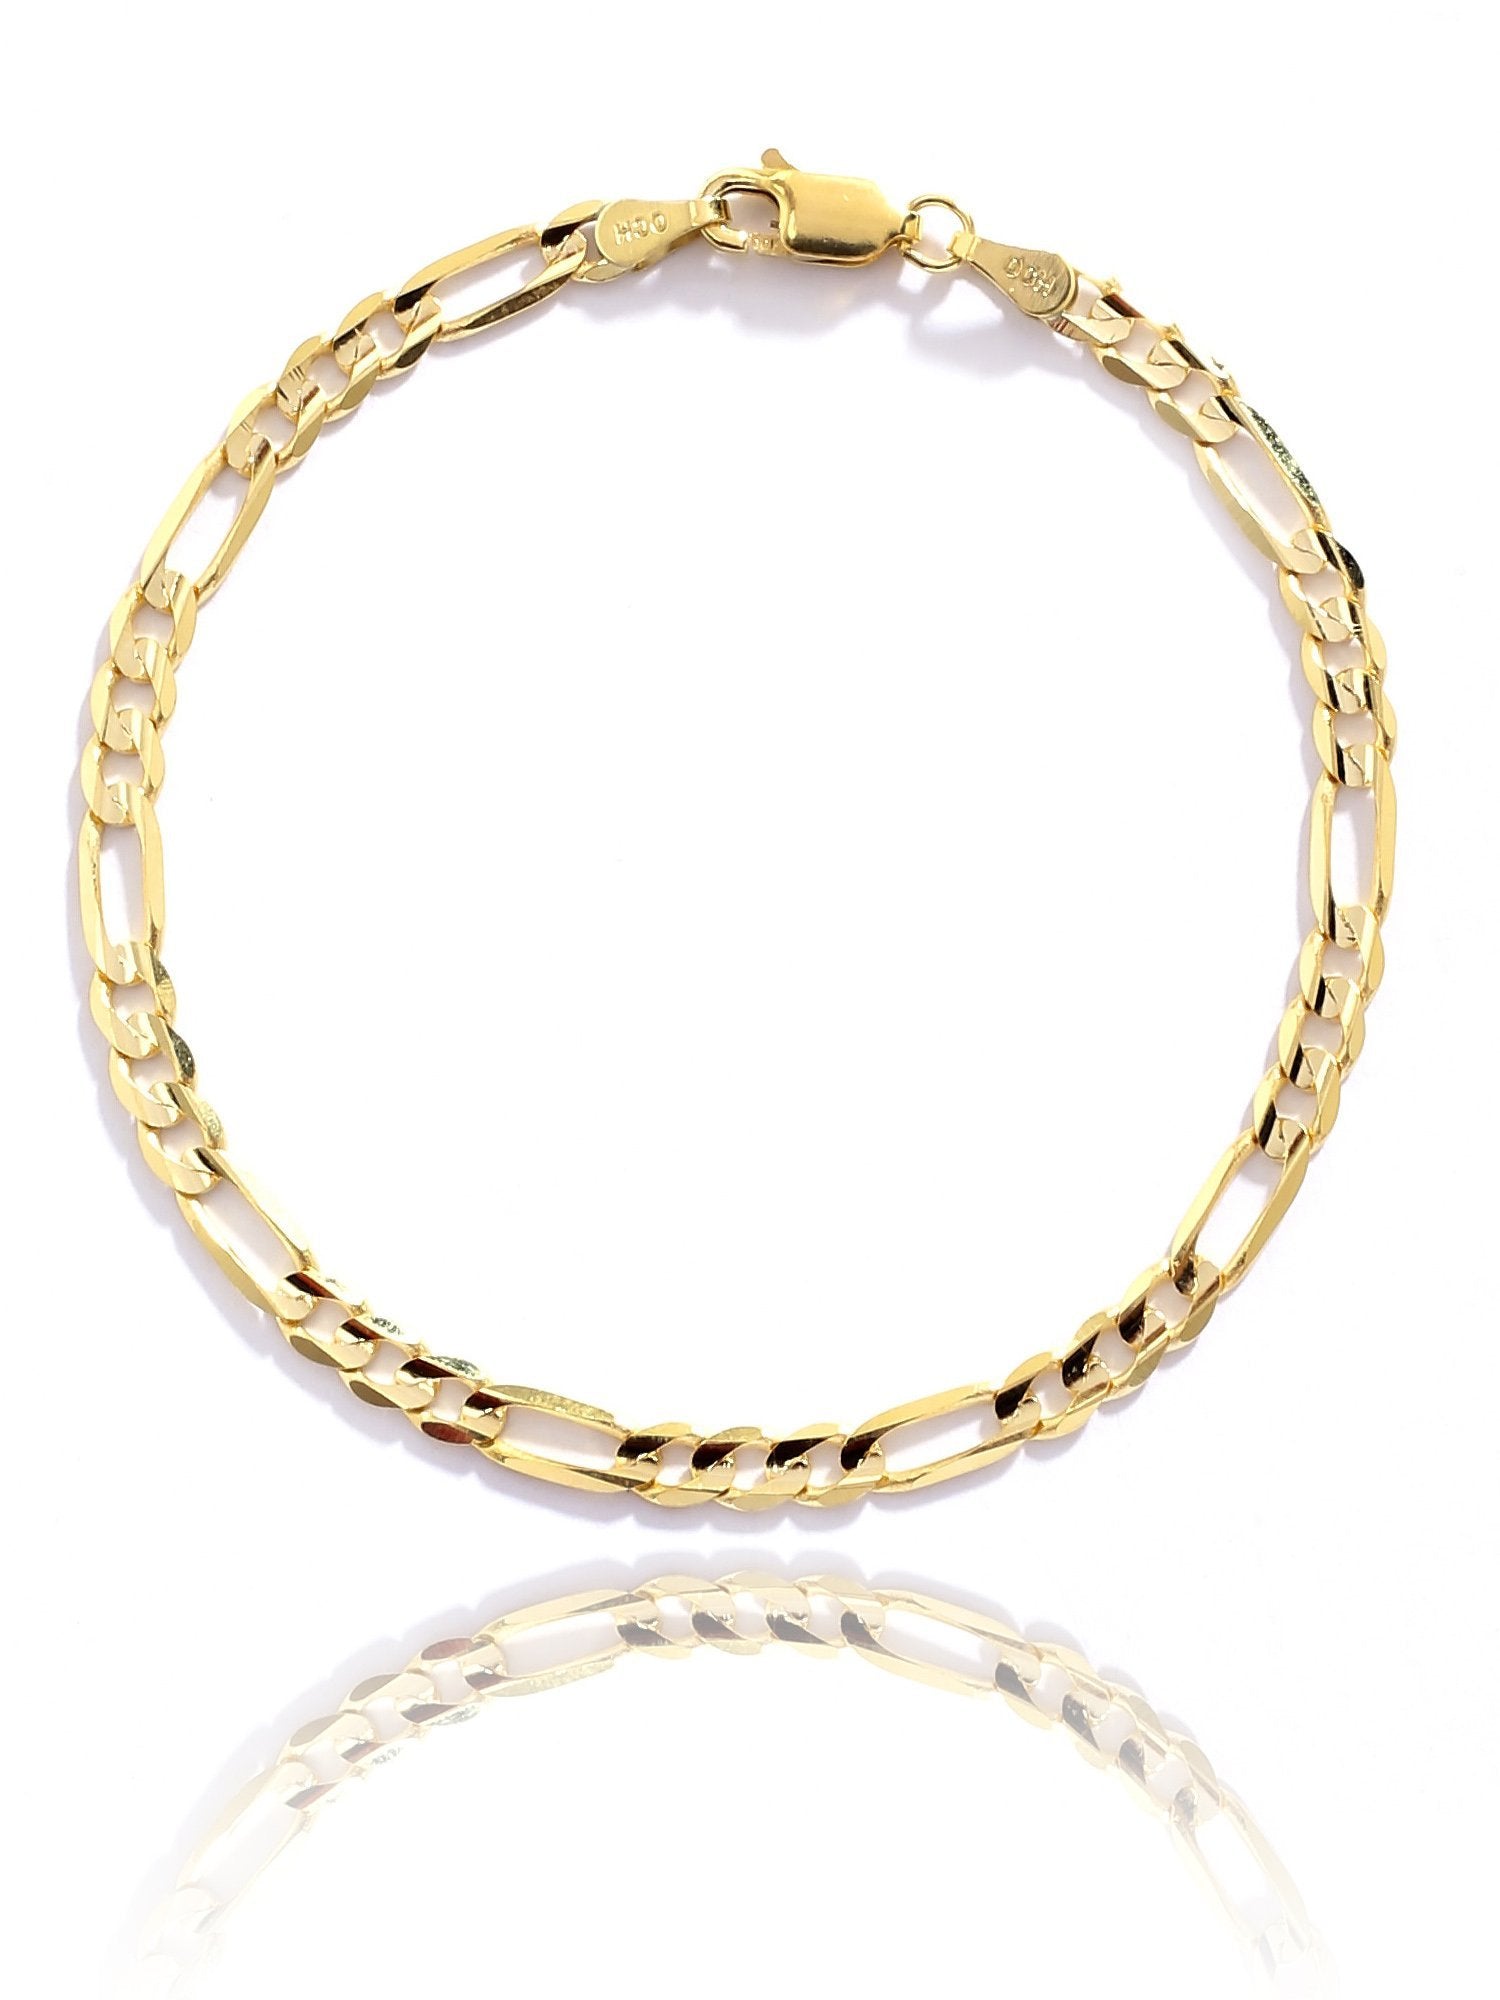 10k Yellow Gold Figaro Chain Bracelet with Concave Look, 0.19 Inch (4.7mm)